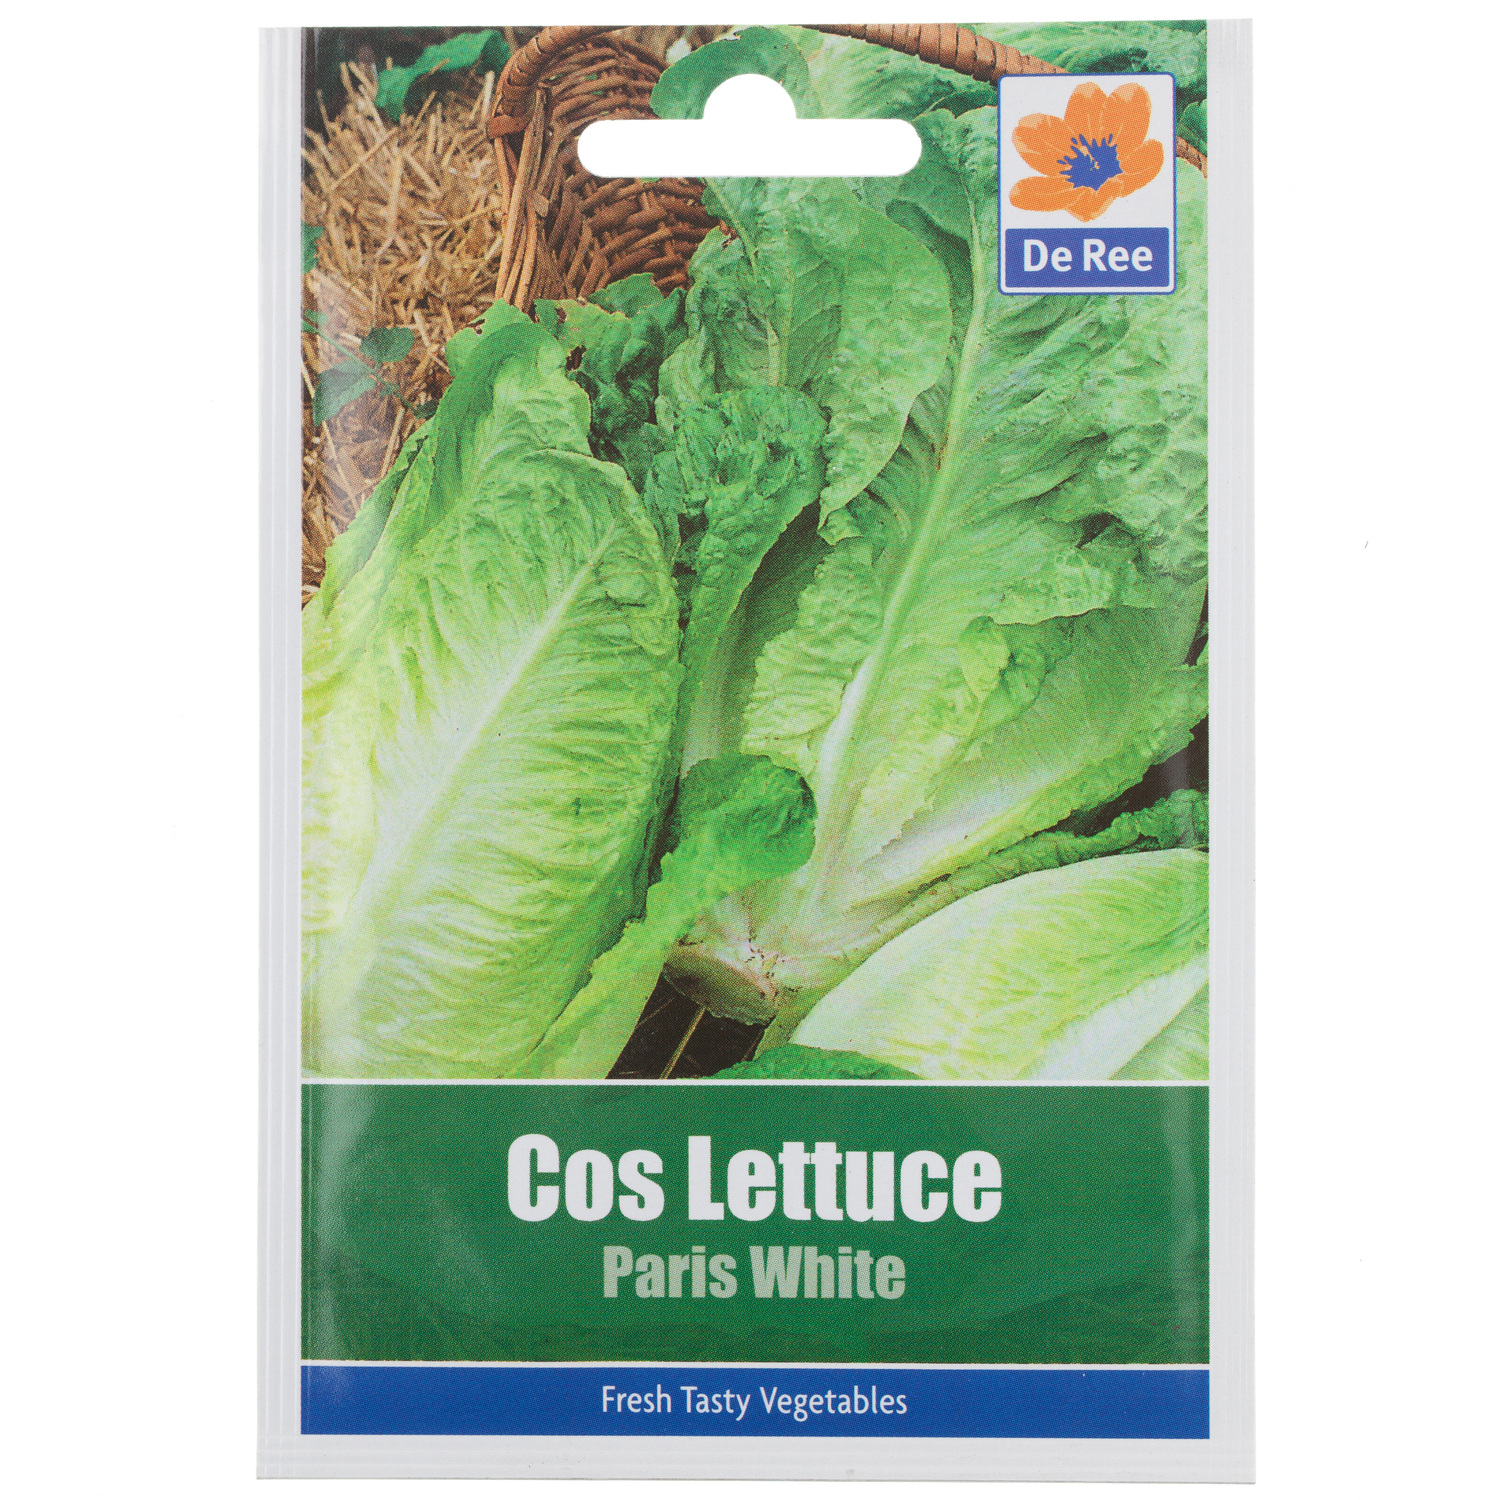 Cos Lettuce Paris White Seed Packet Image